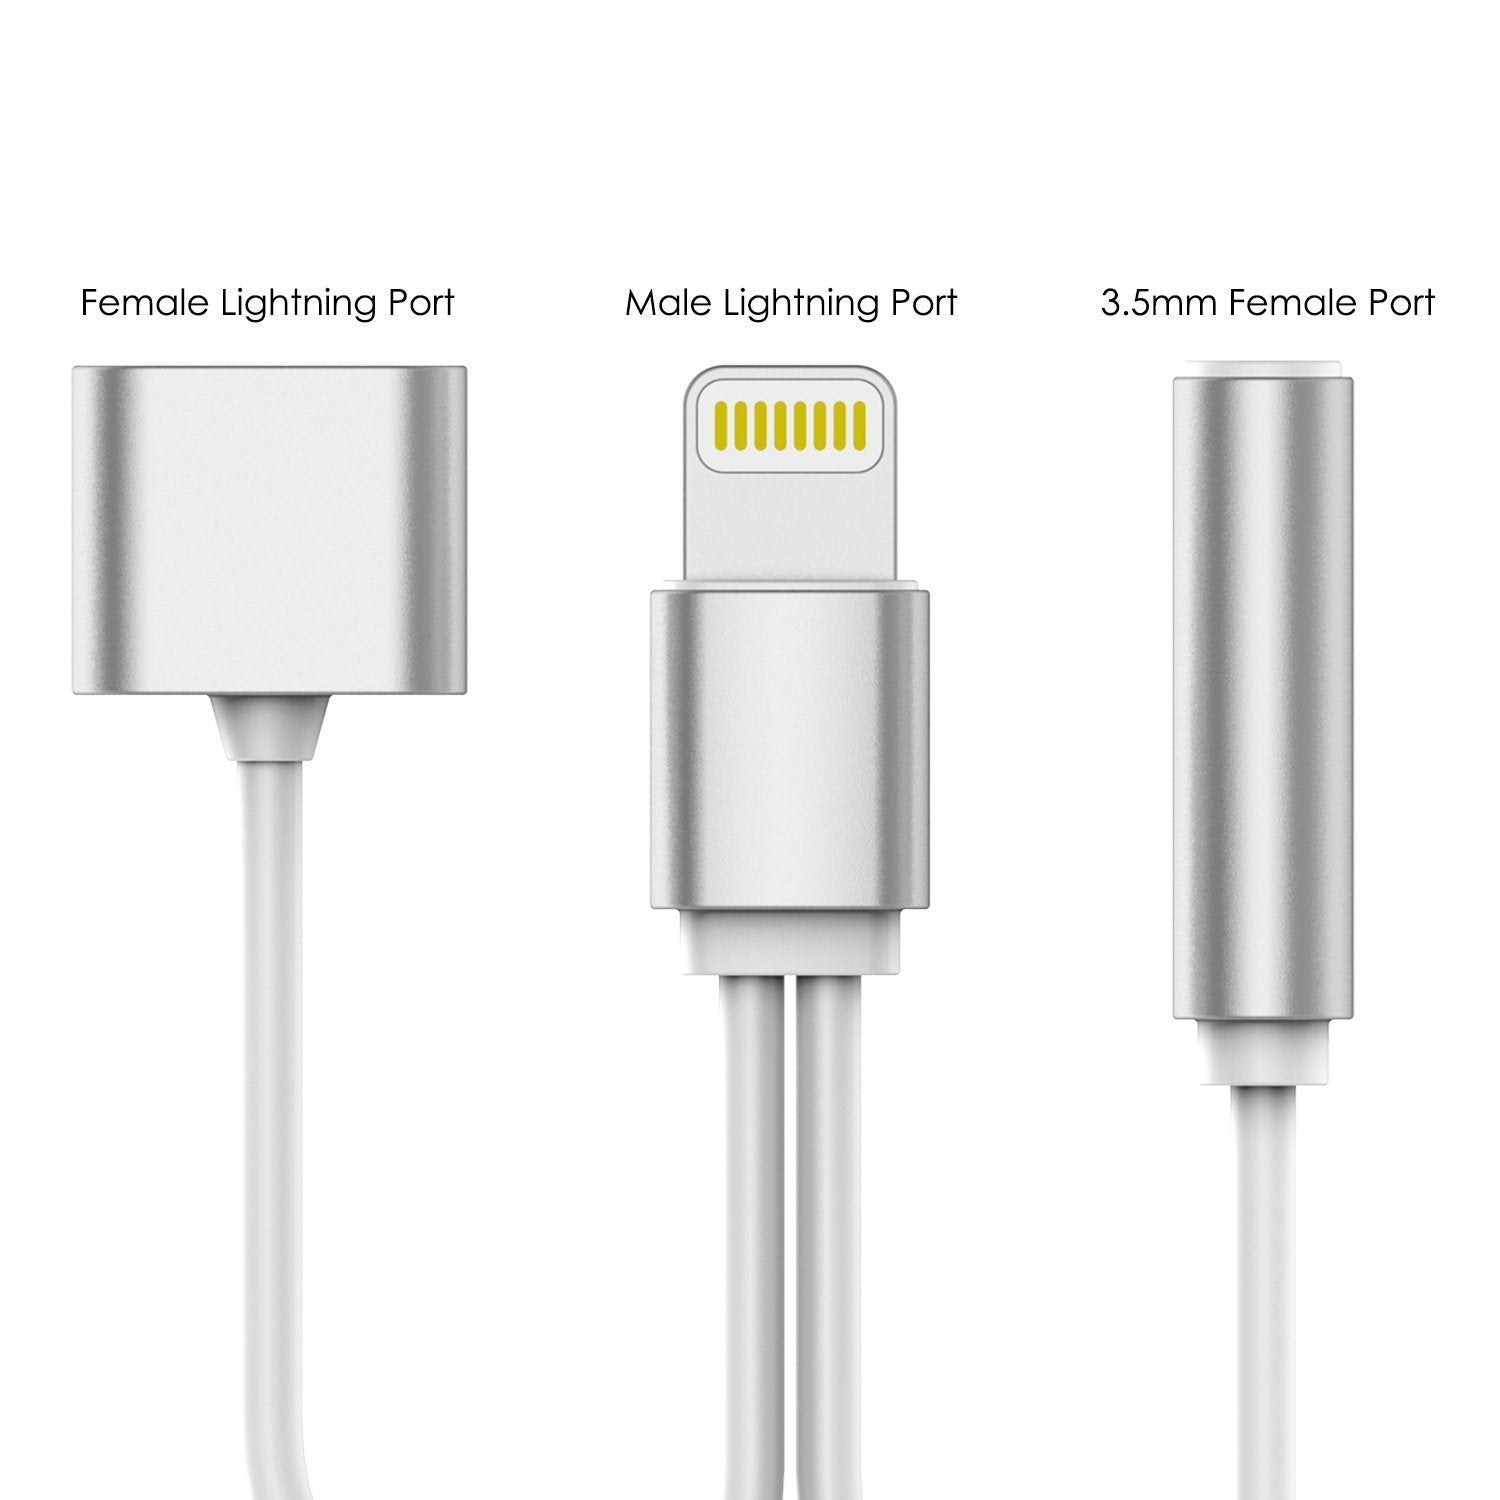 PUNKZAP Lightning Adapter Cable 2 in 1 Splitter Charger [SILVER]